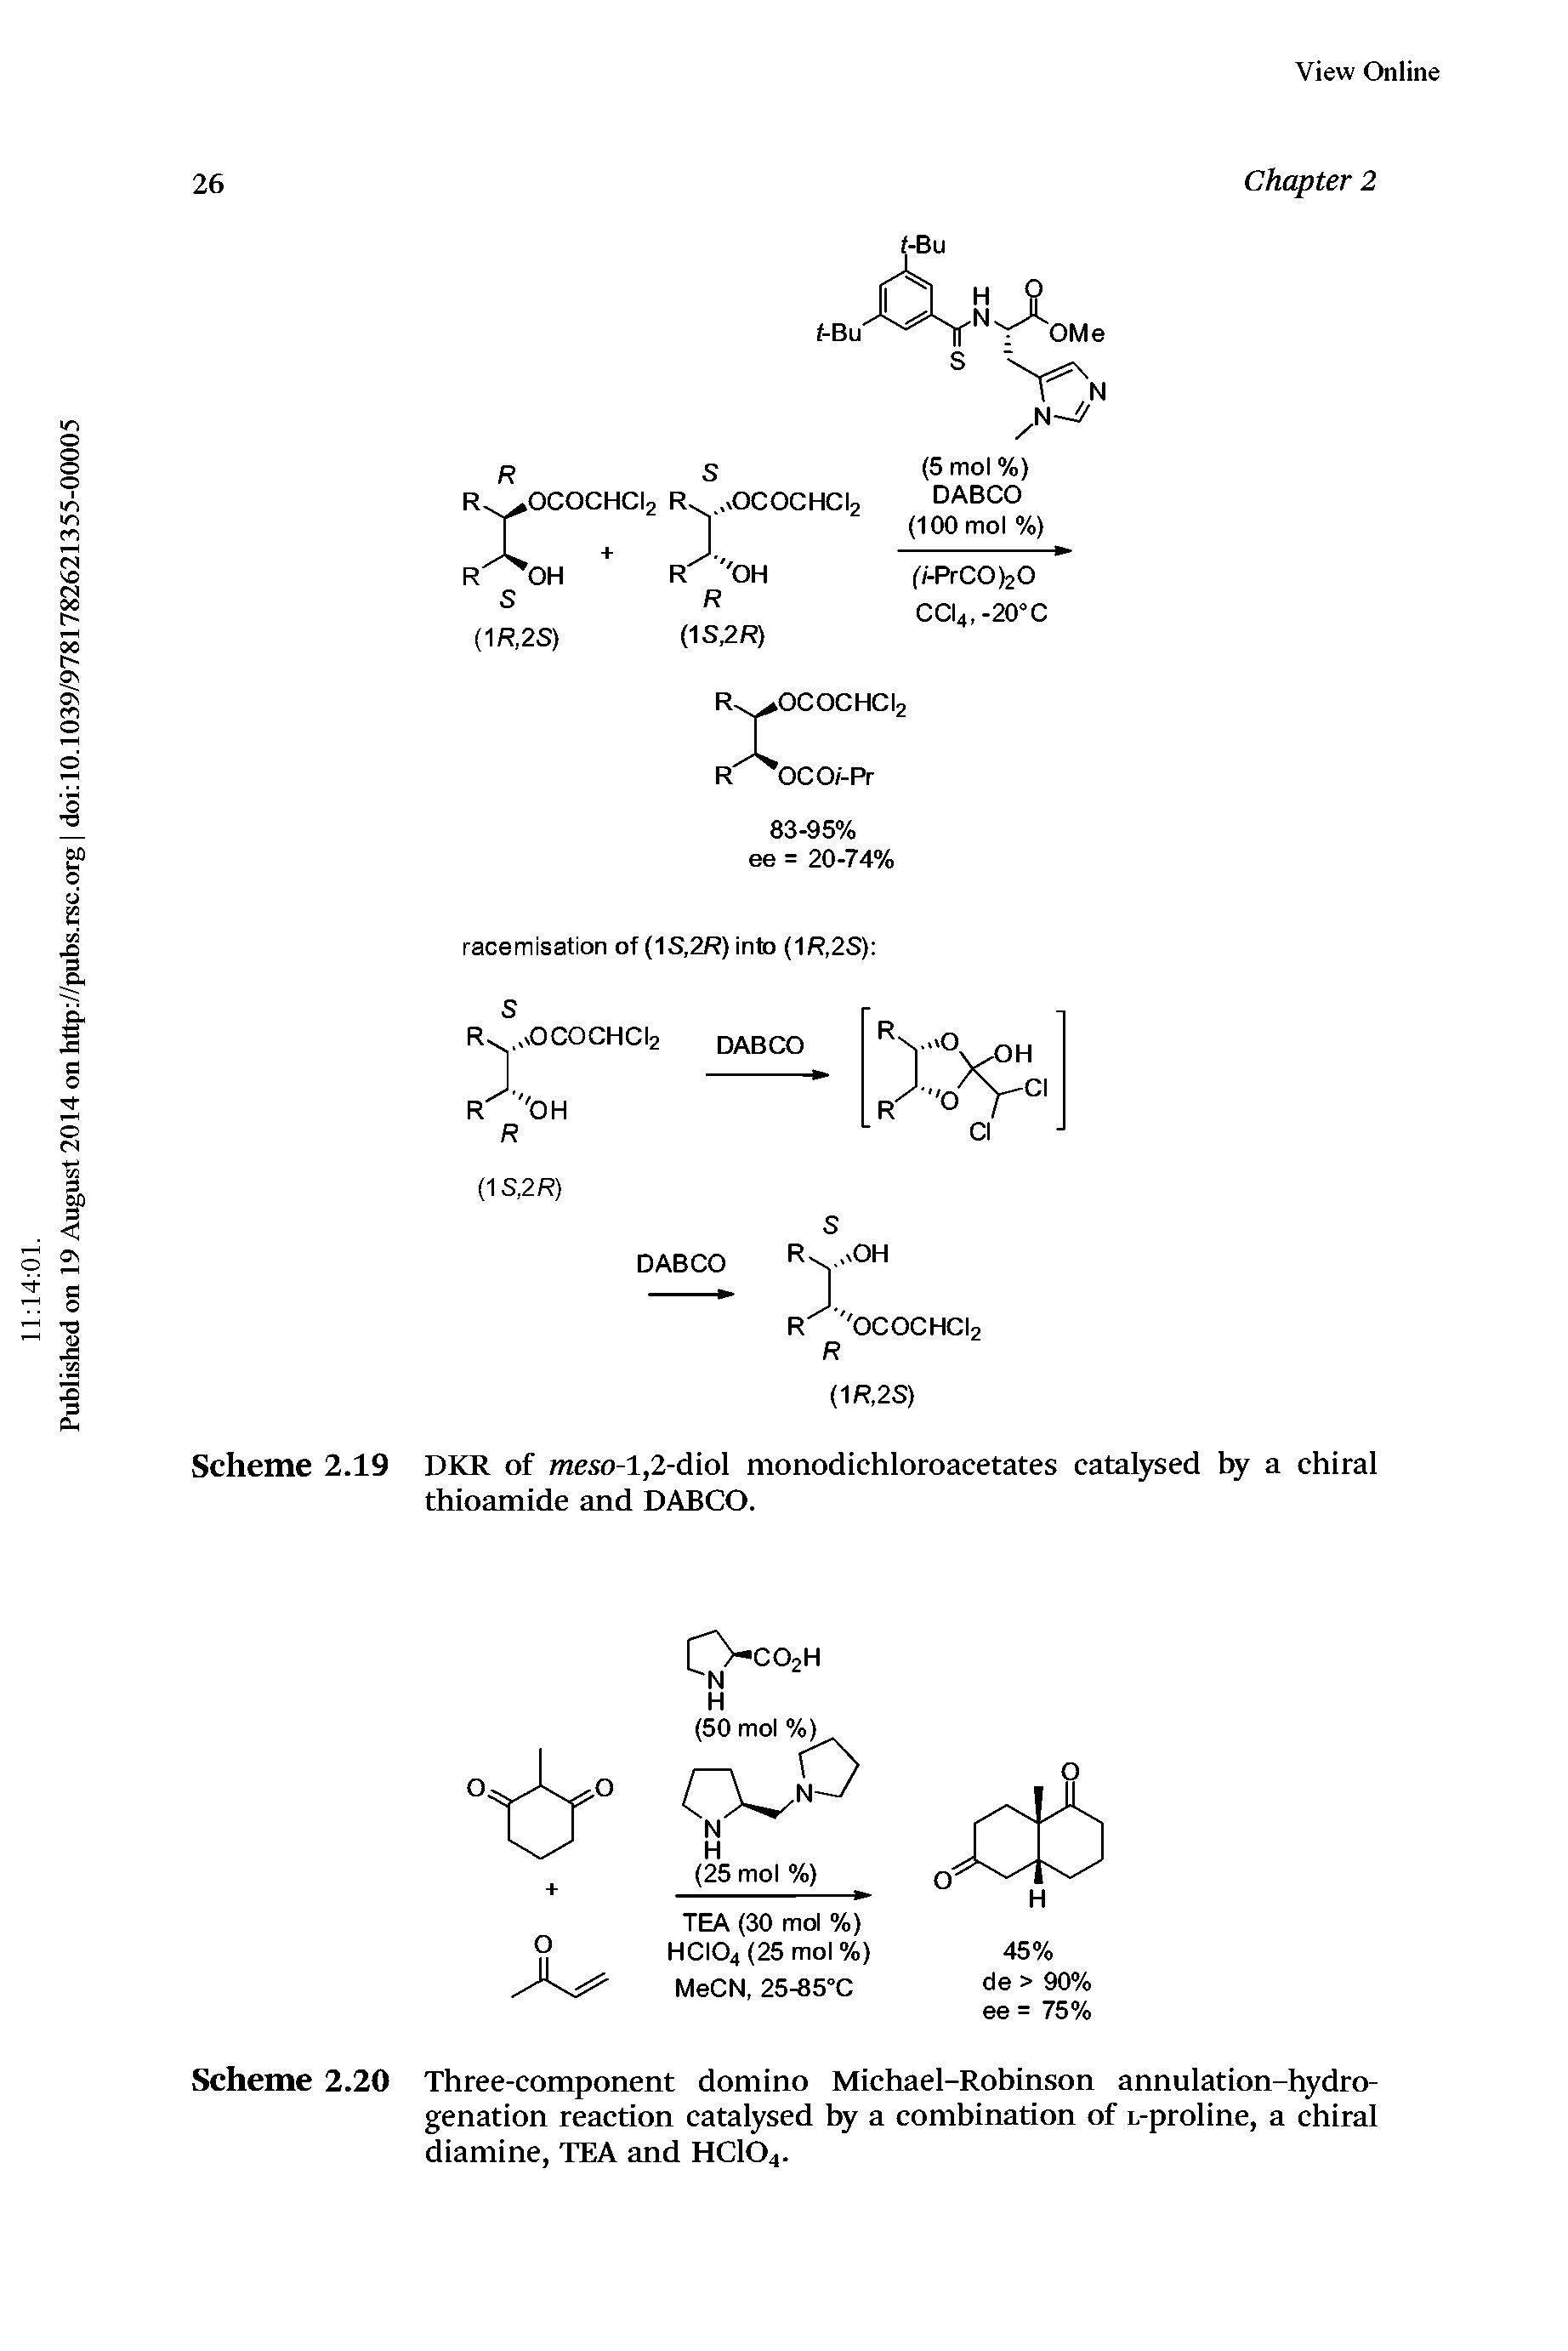 Scheme 2.20 Three-component domino Michael-Robinson annulation-hydro-genation reaction catalysed by a combination of L-proline, a chiral diamine, TEA and HCIO4.